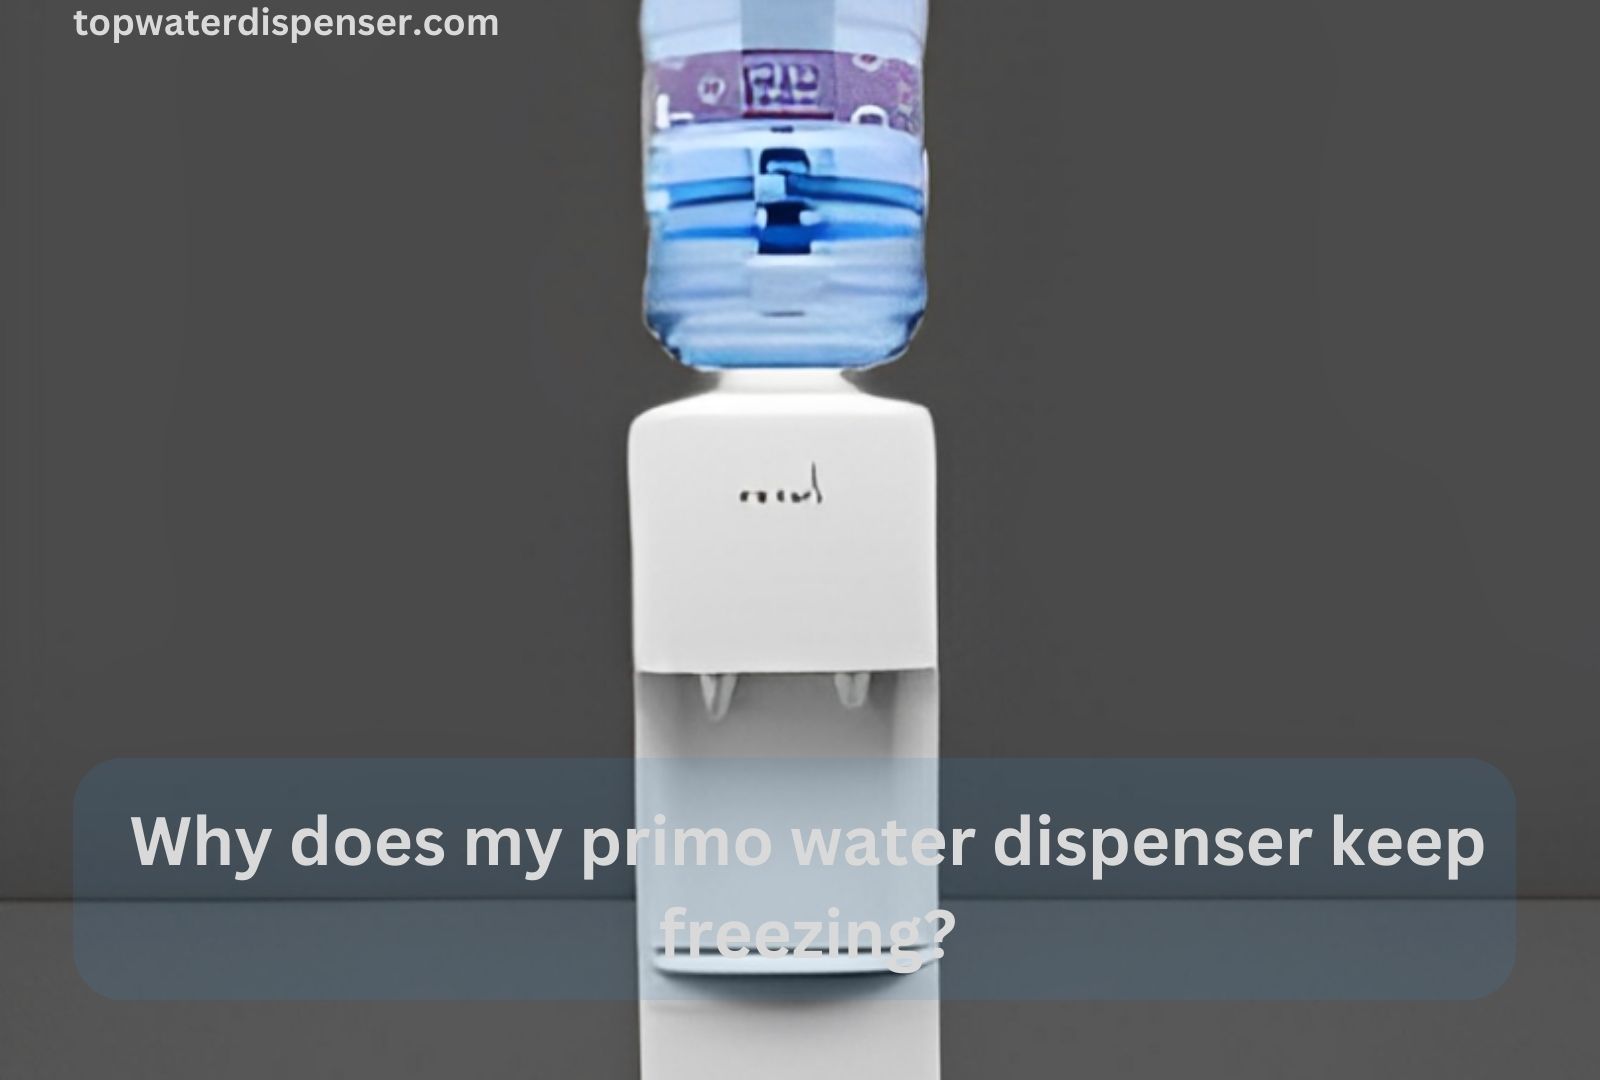 How To Put 5 Gallon Water Jug On Dispenser?